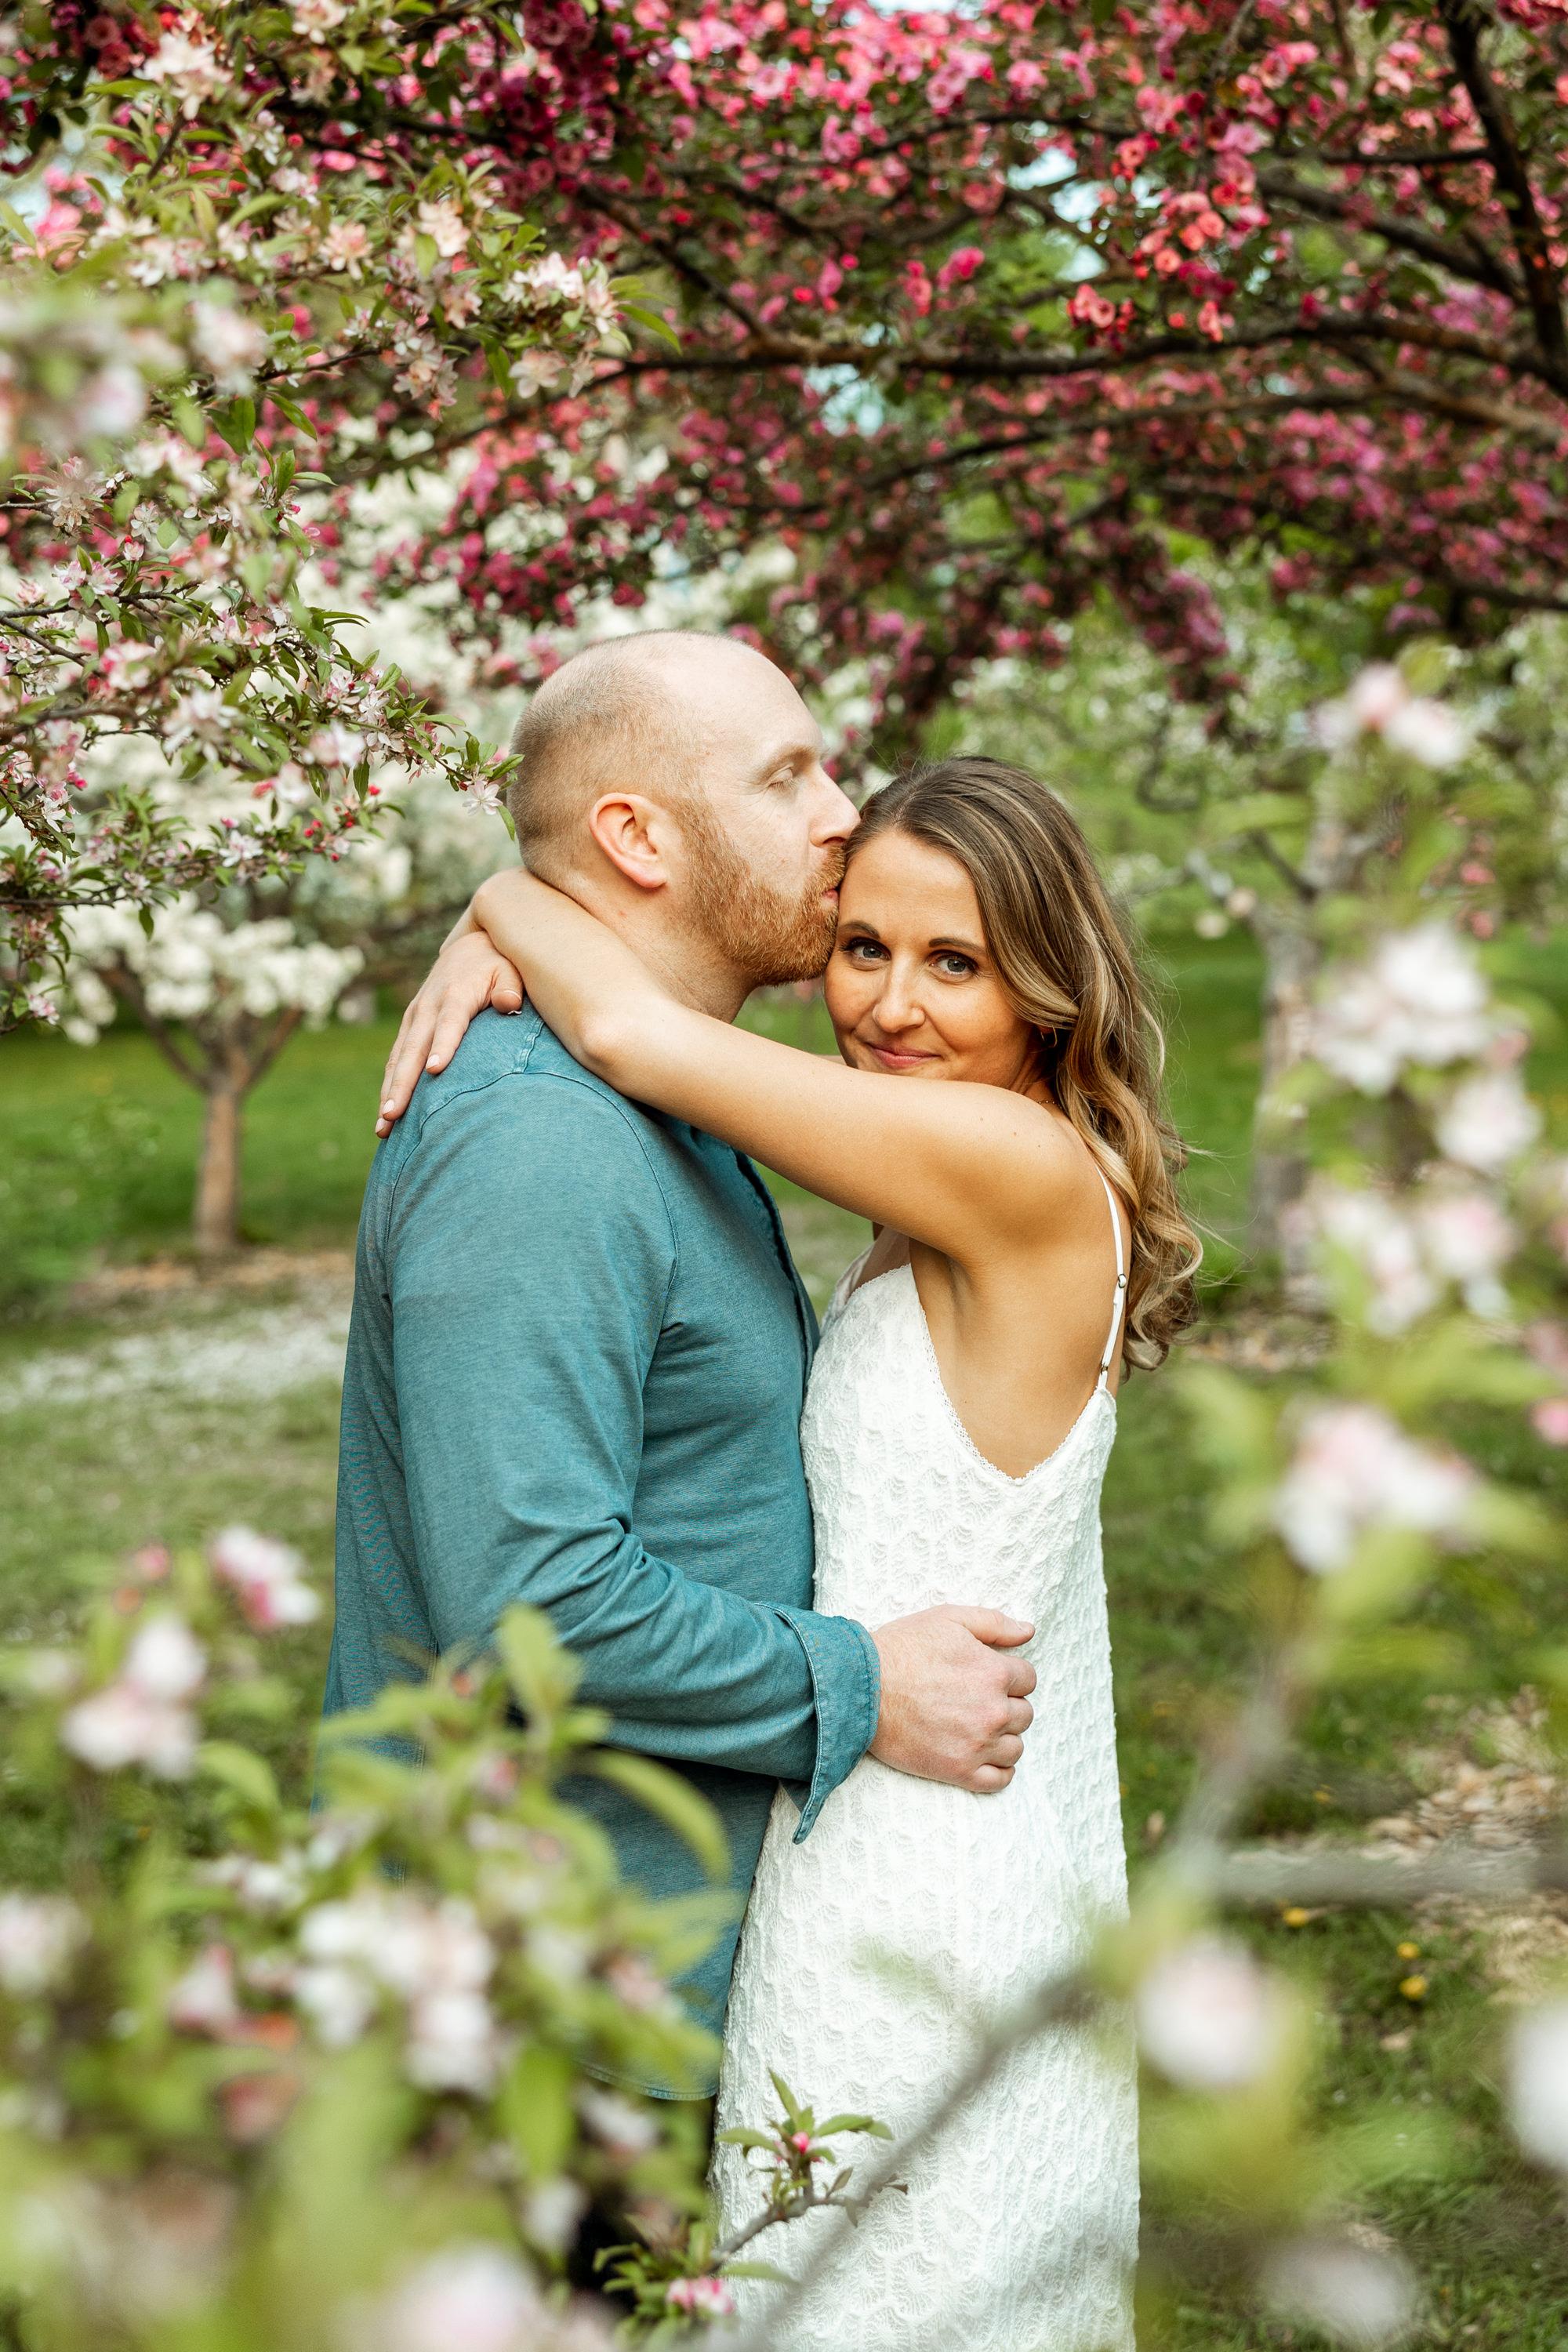 The Wedding Website of Hanna Middlebrook and Joe Richie